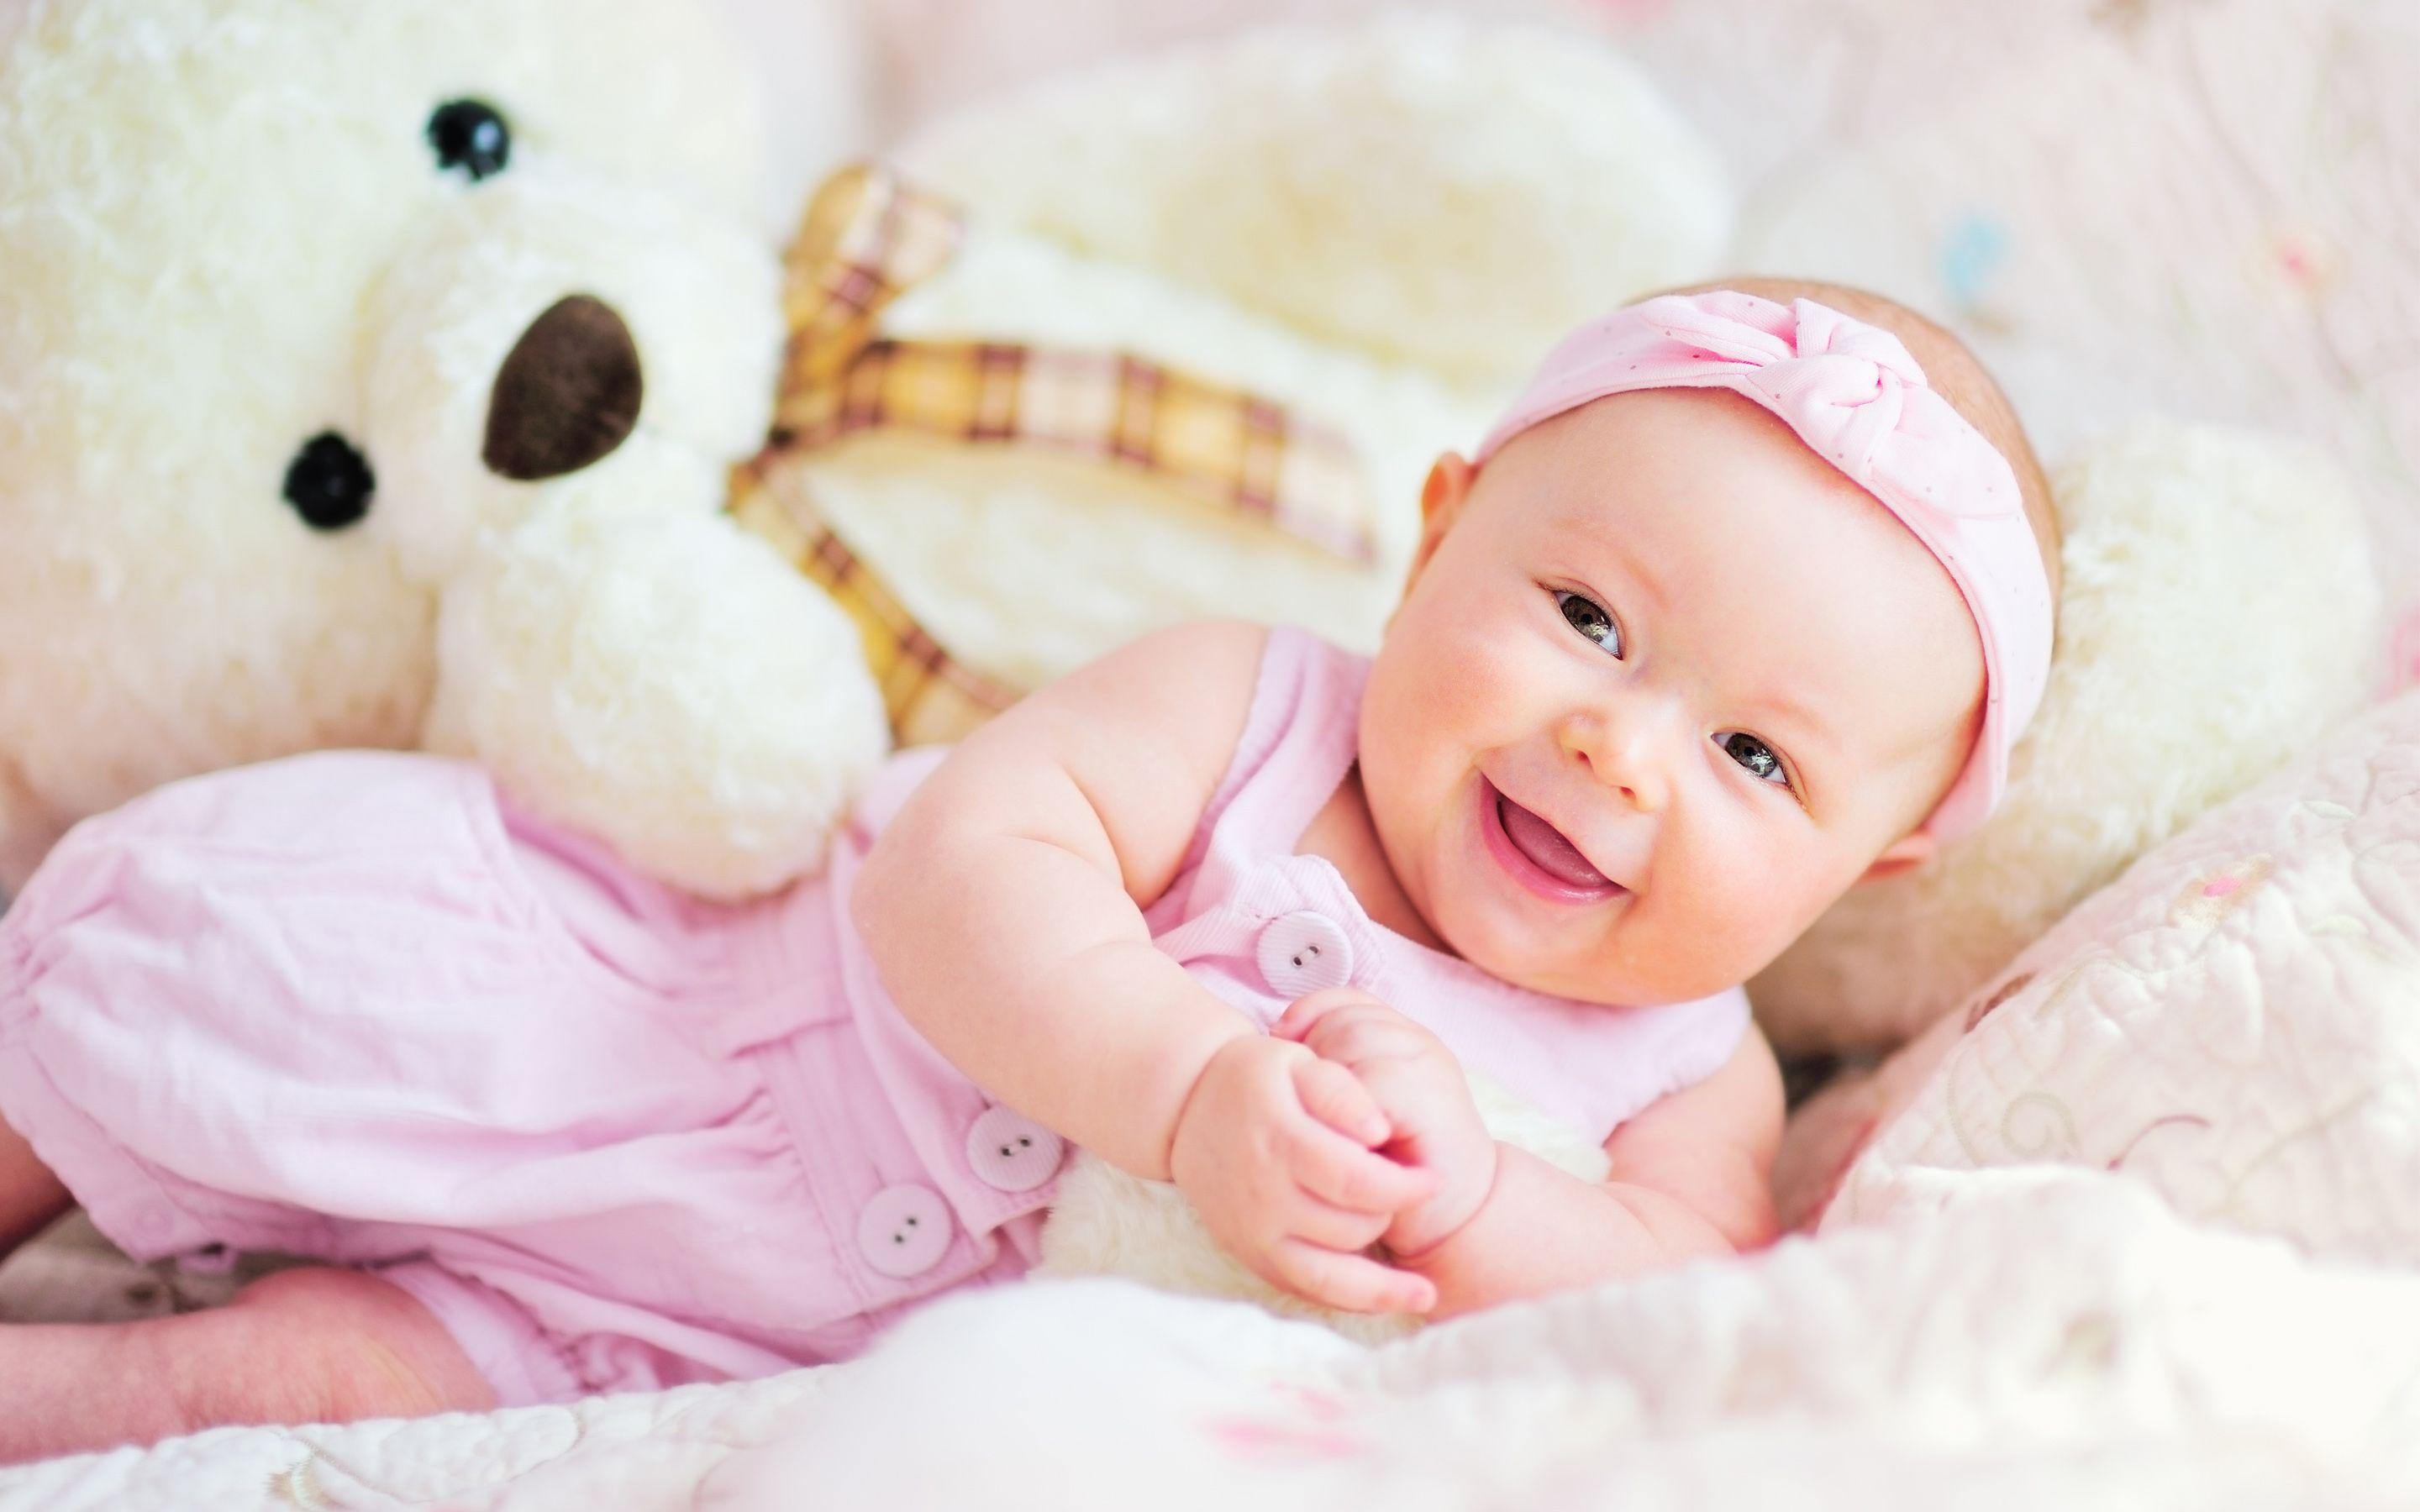 Cute Baby Teddy Bear Best Picture For Background HD Pics Of Mobile